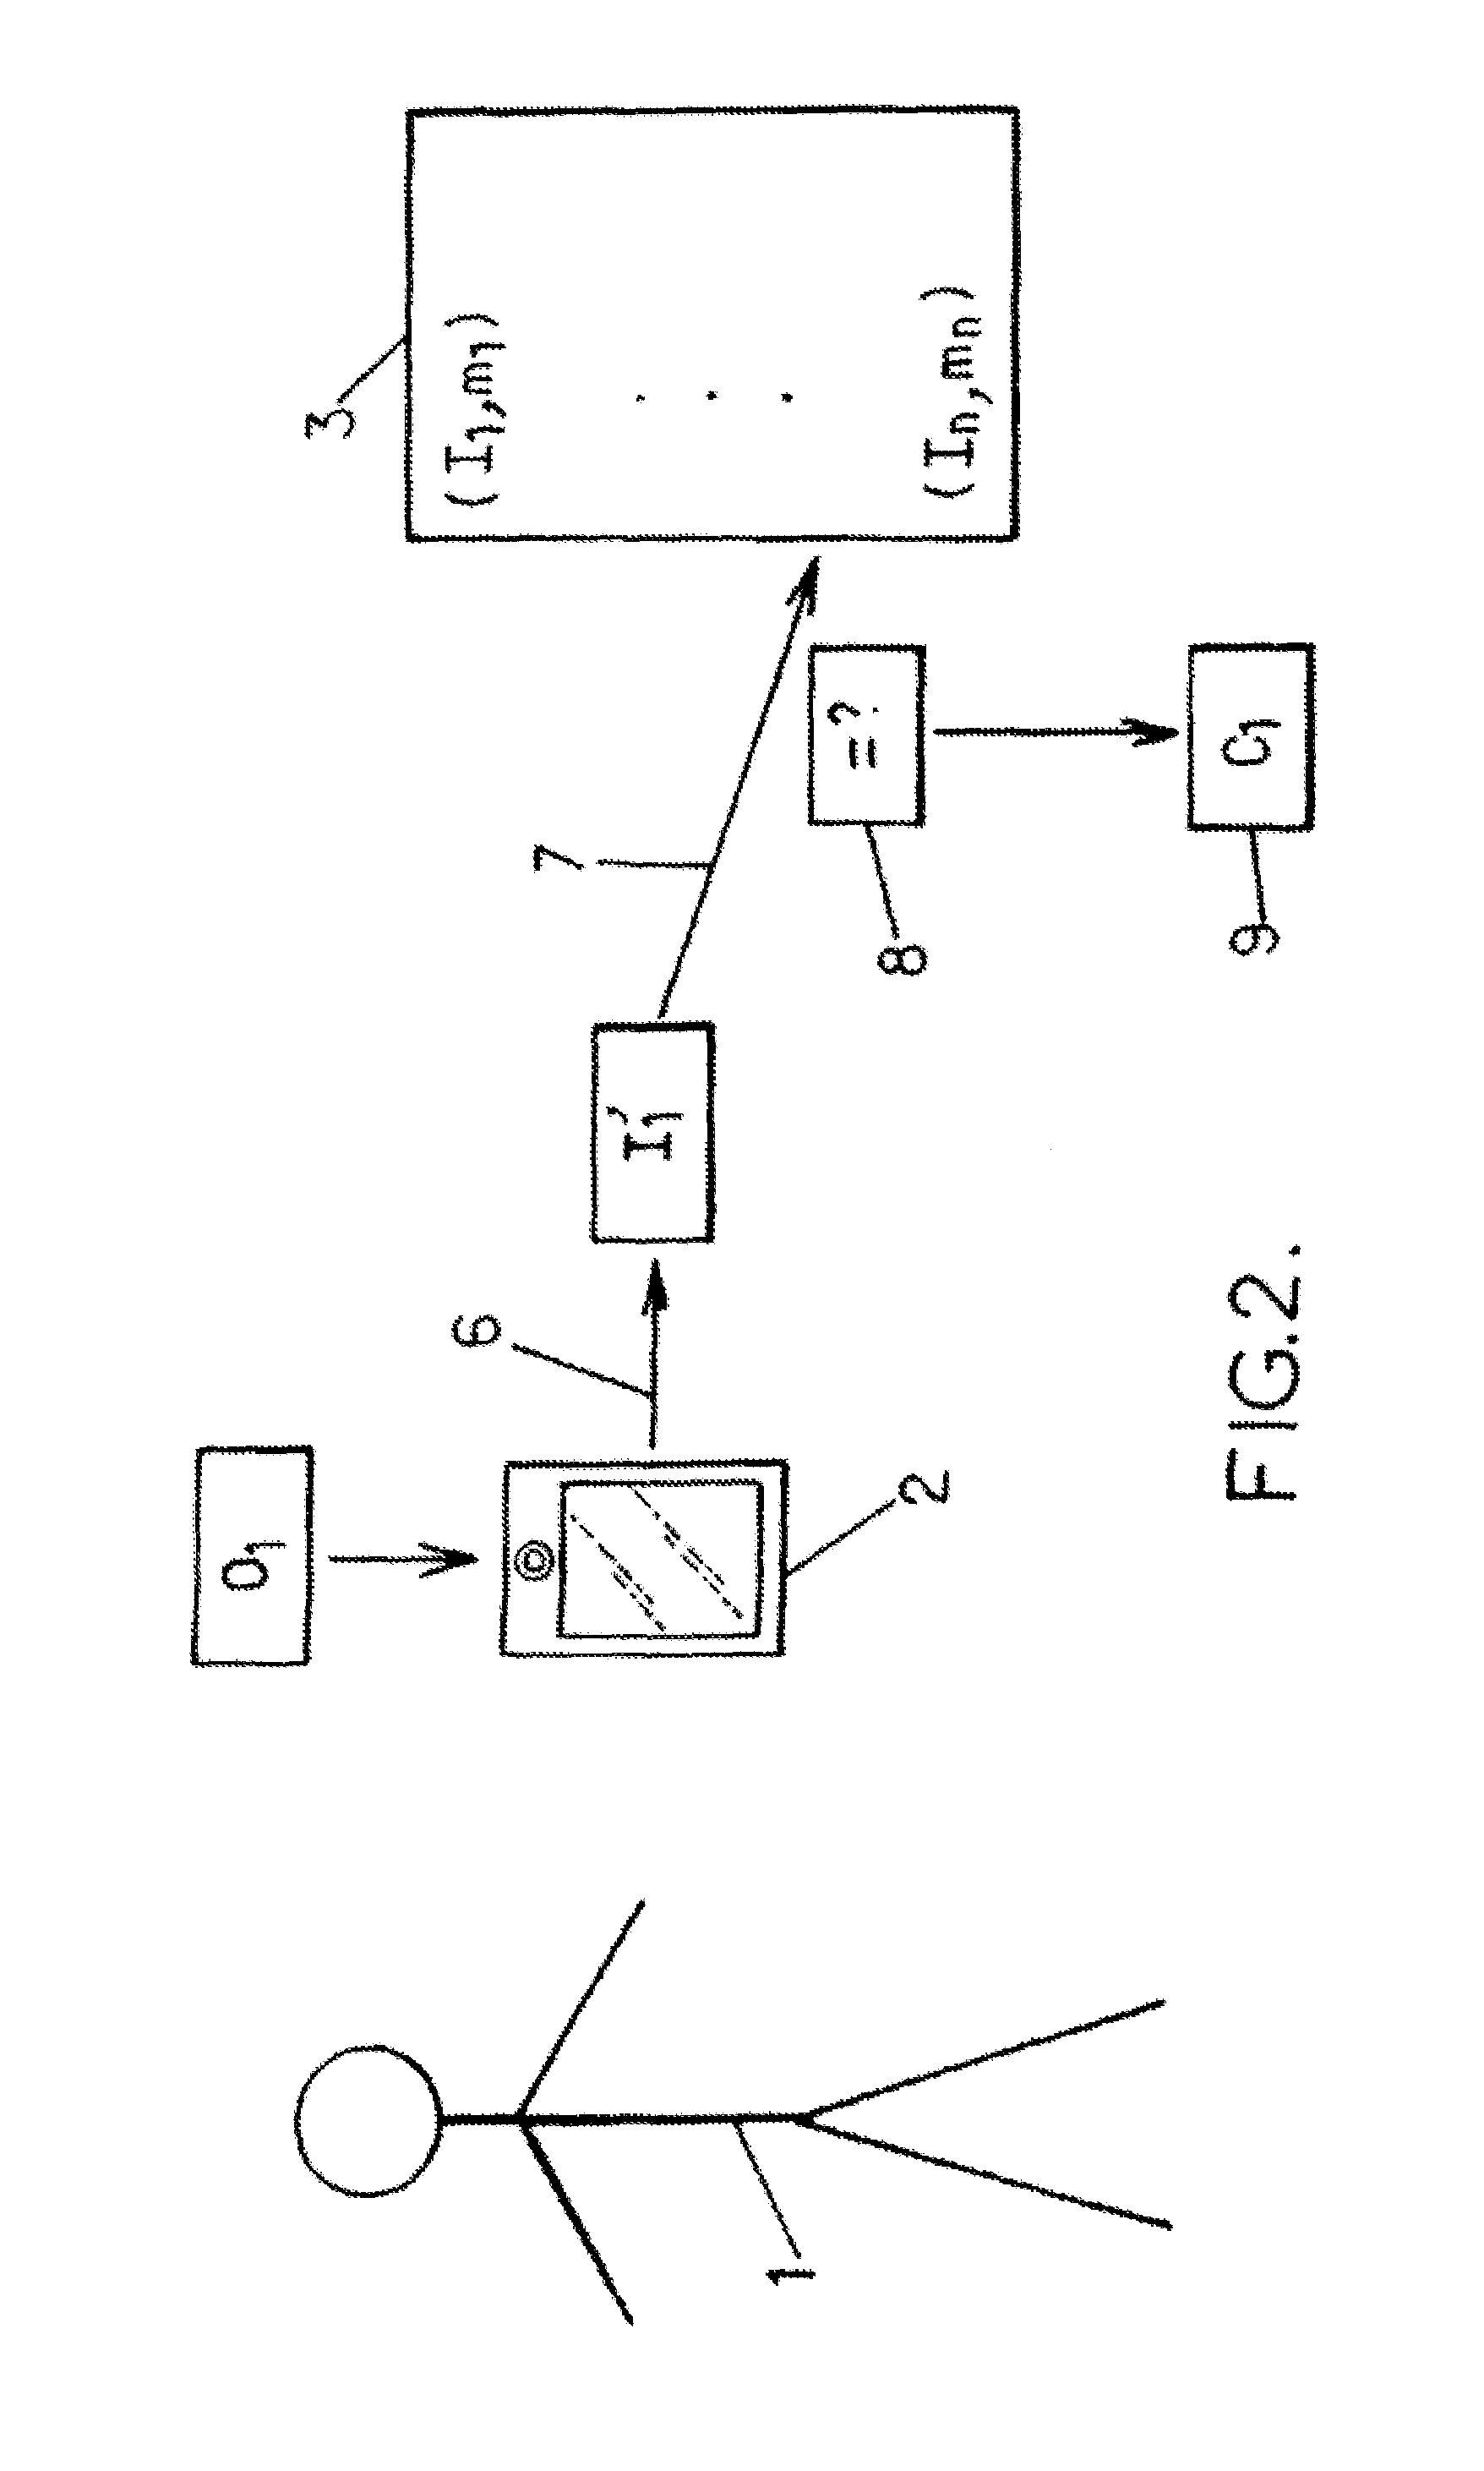 Method for enabling authentication or identification, and related verification system